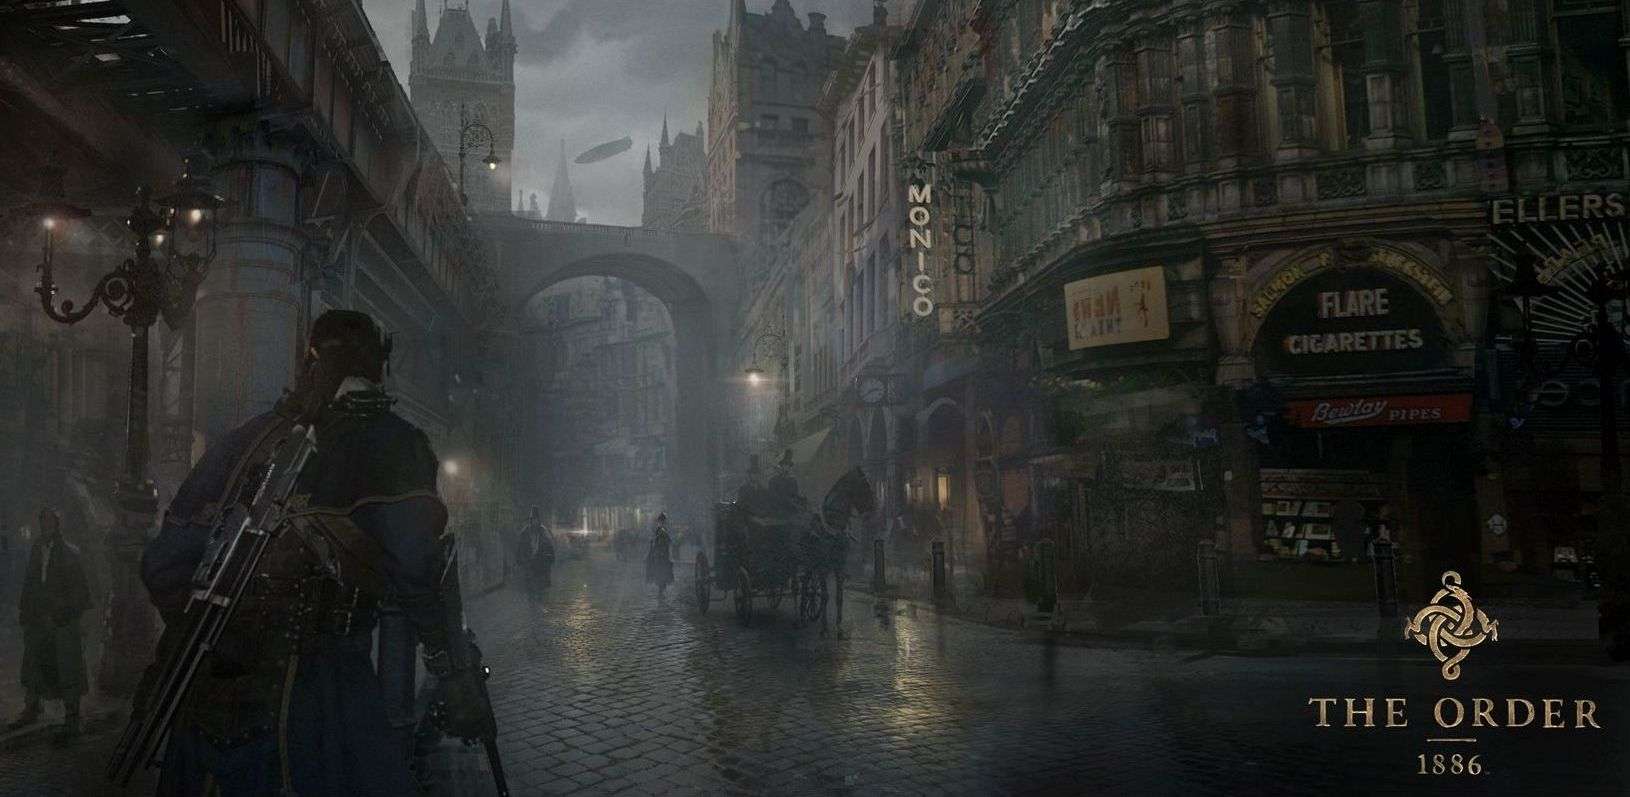 The Art of #1 The Order 1886